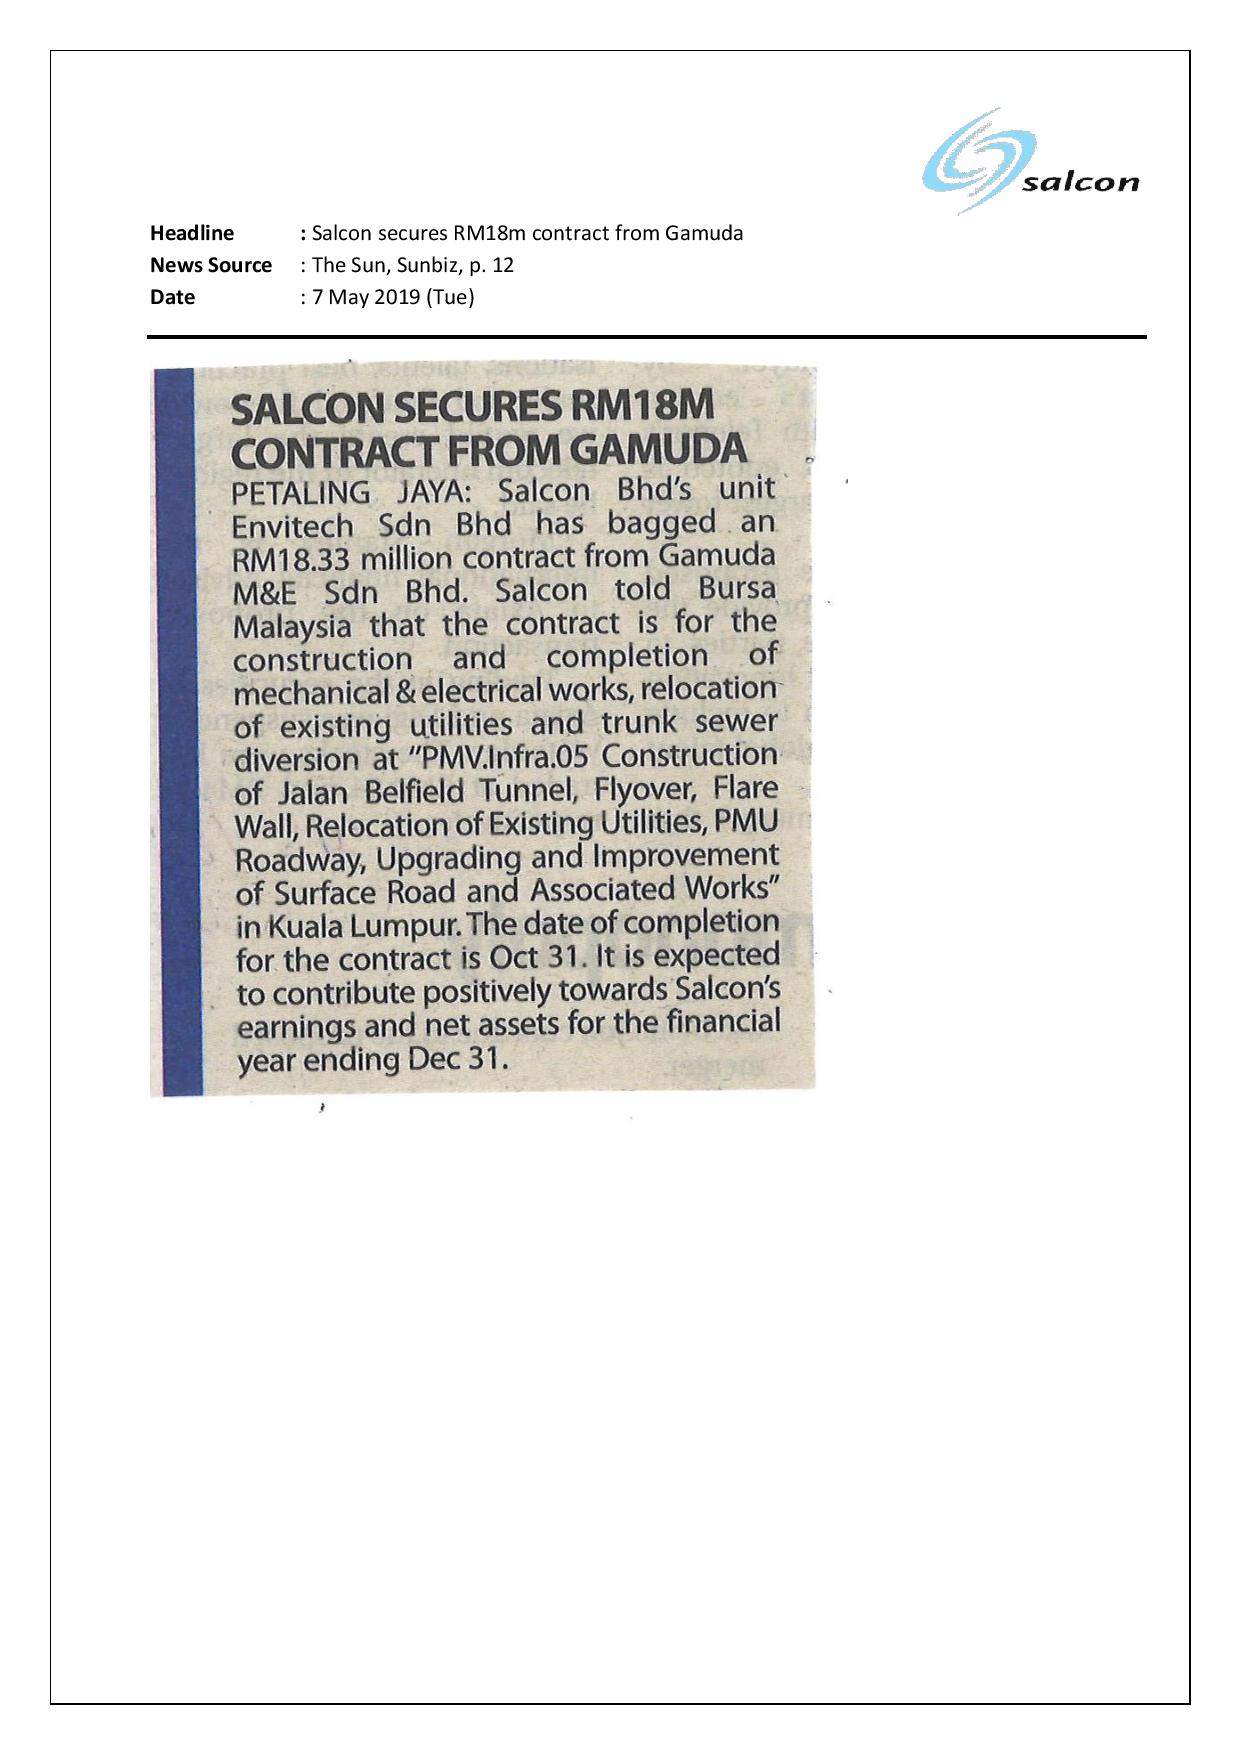 Salcon secures RM18m contract from Gamuda